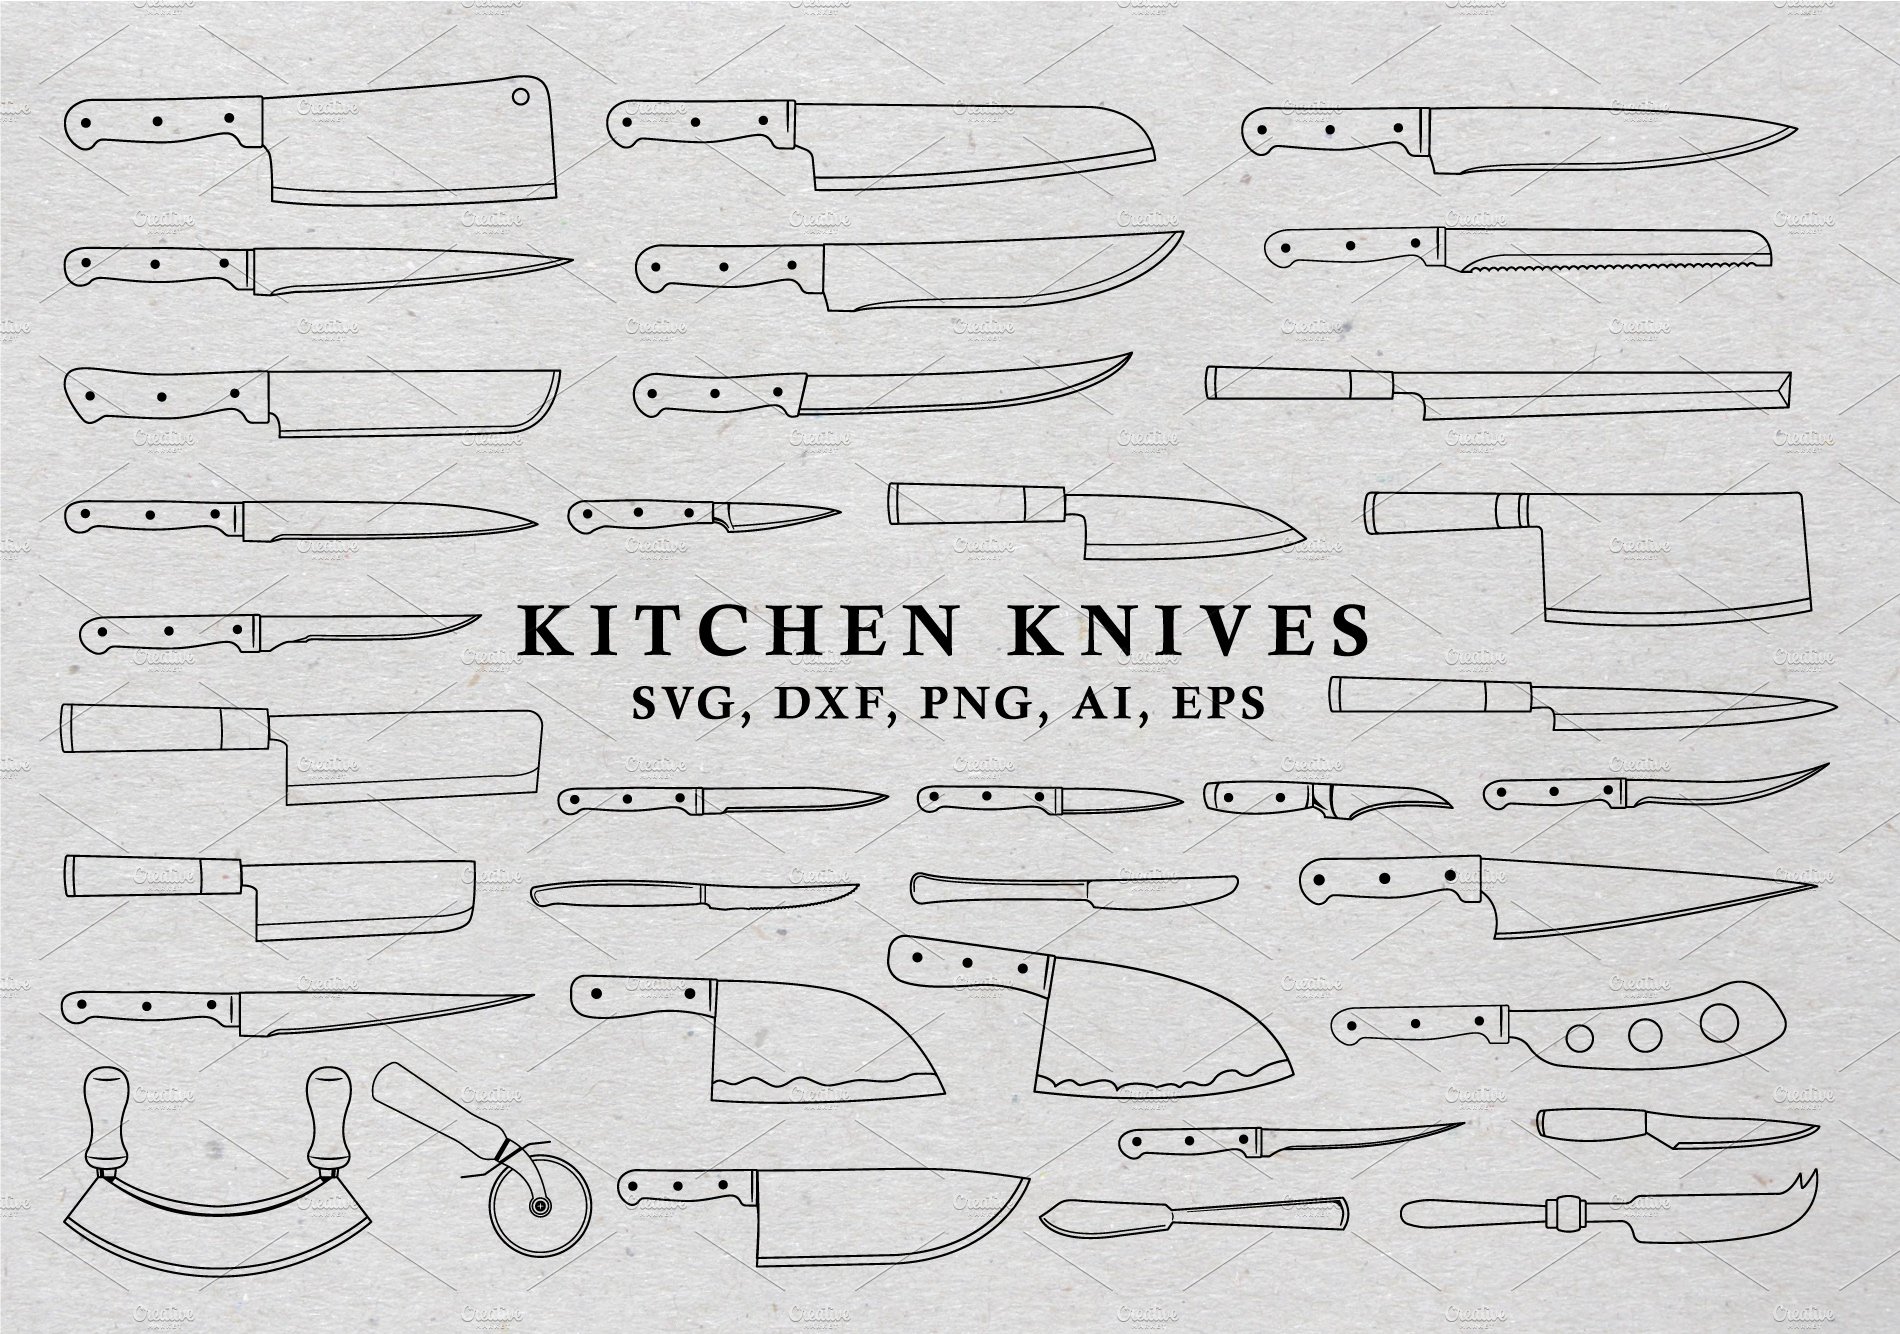 Knife Knives Shapes Vector Pack cover image.